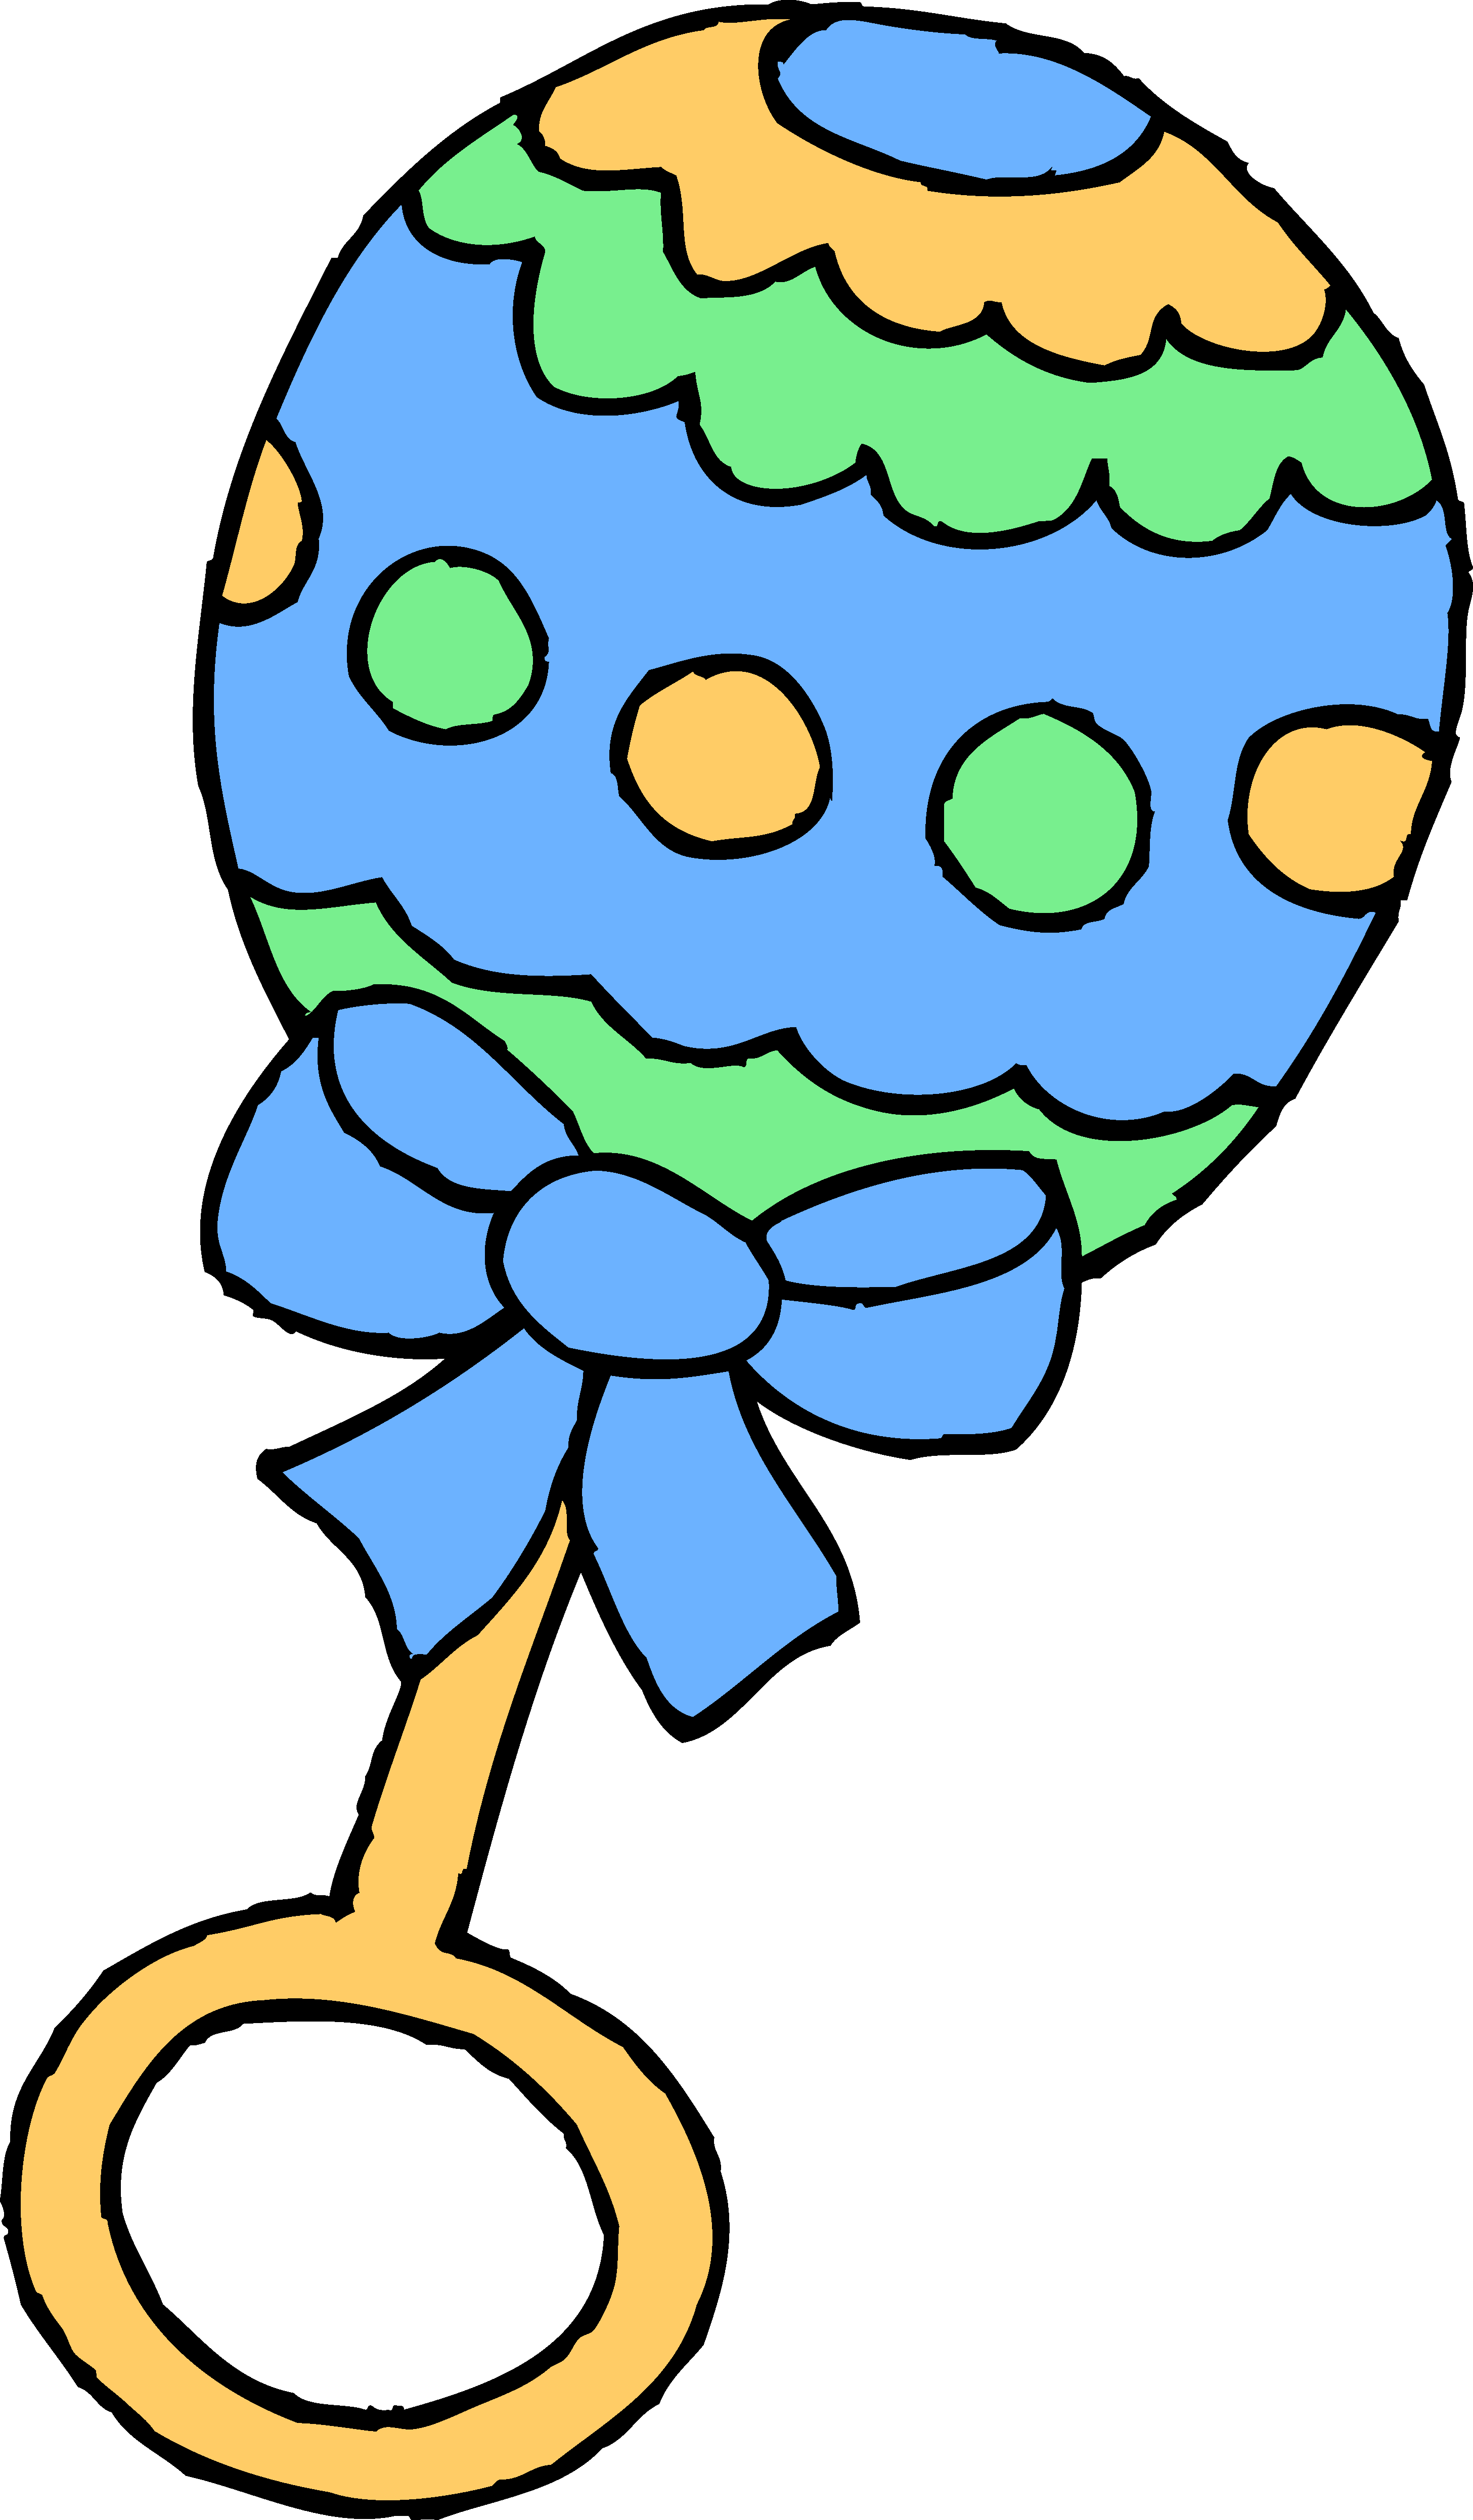 Blue clipart baby toy pencil and in color blue